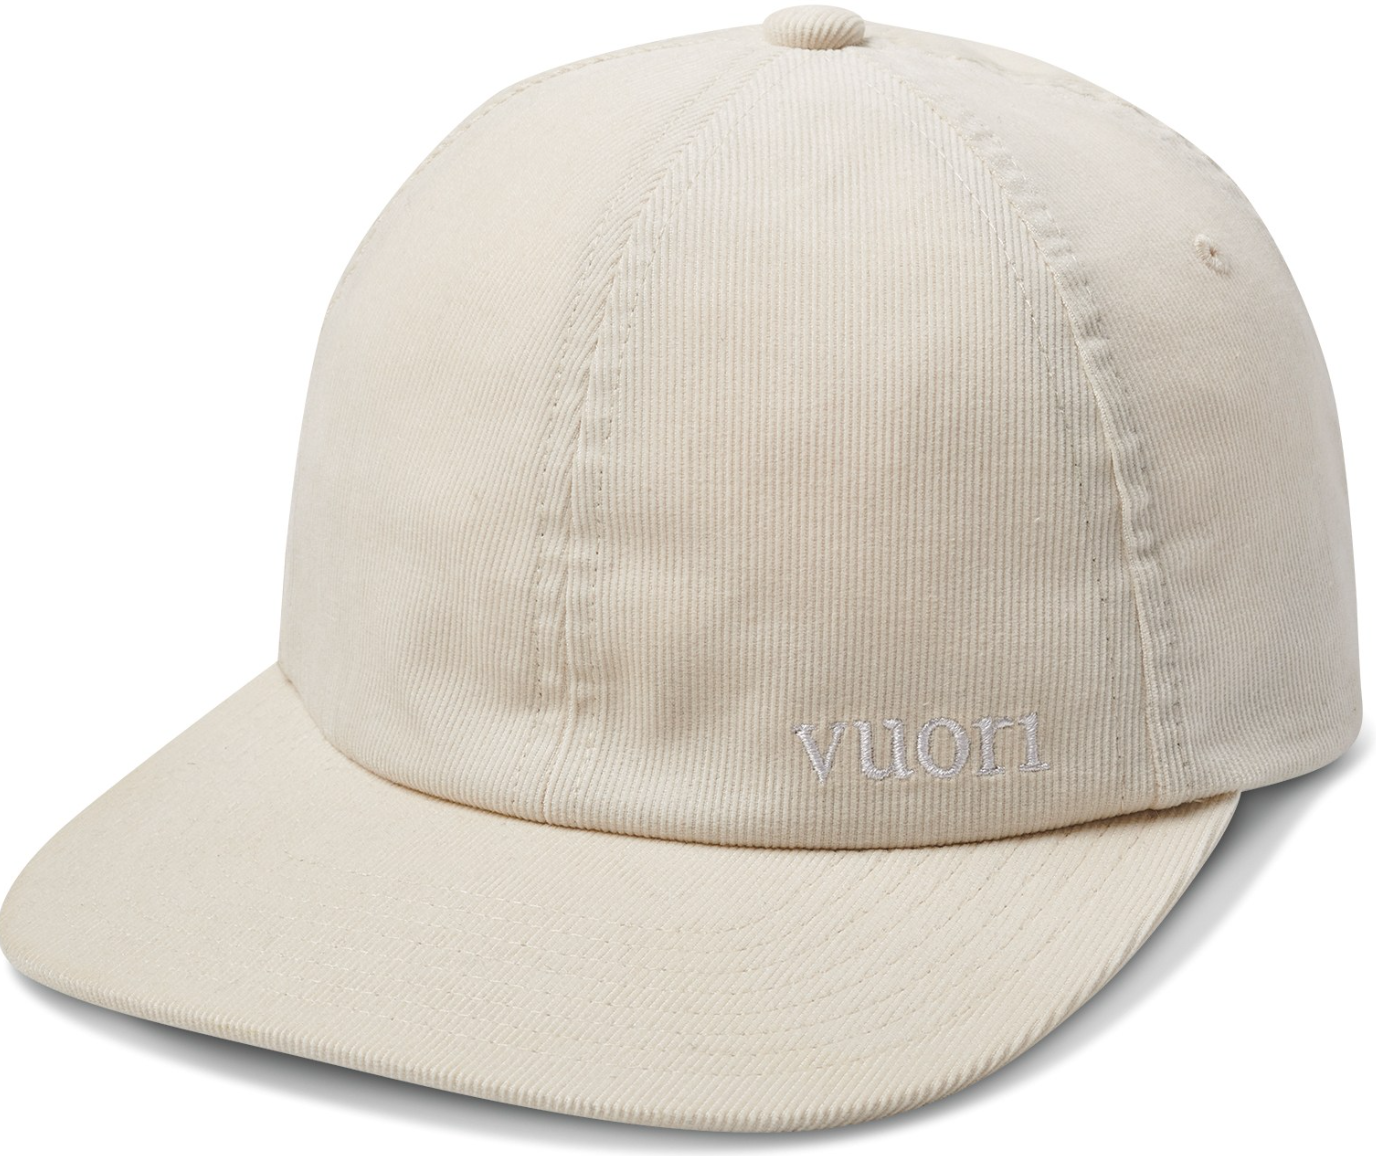 Vuori Performance Cord Hat - Outtabounds